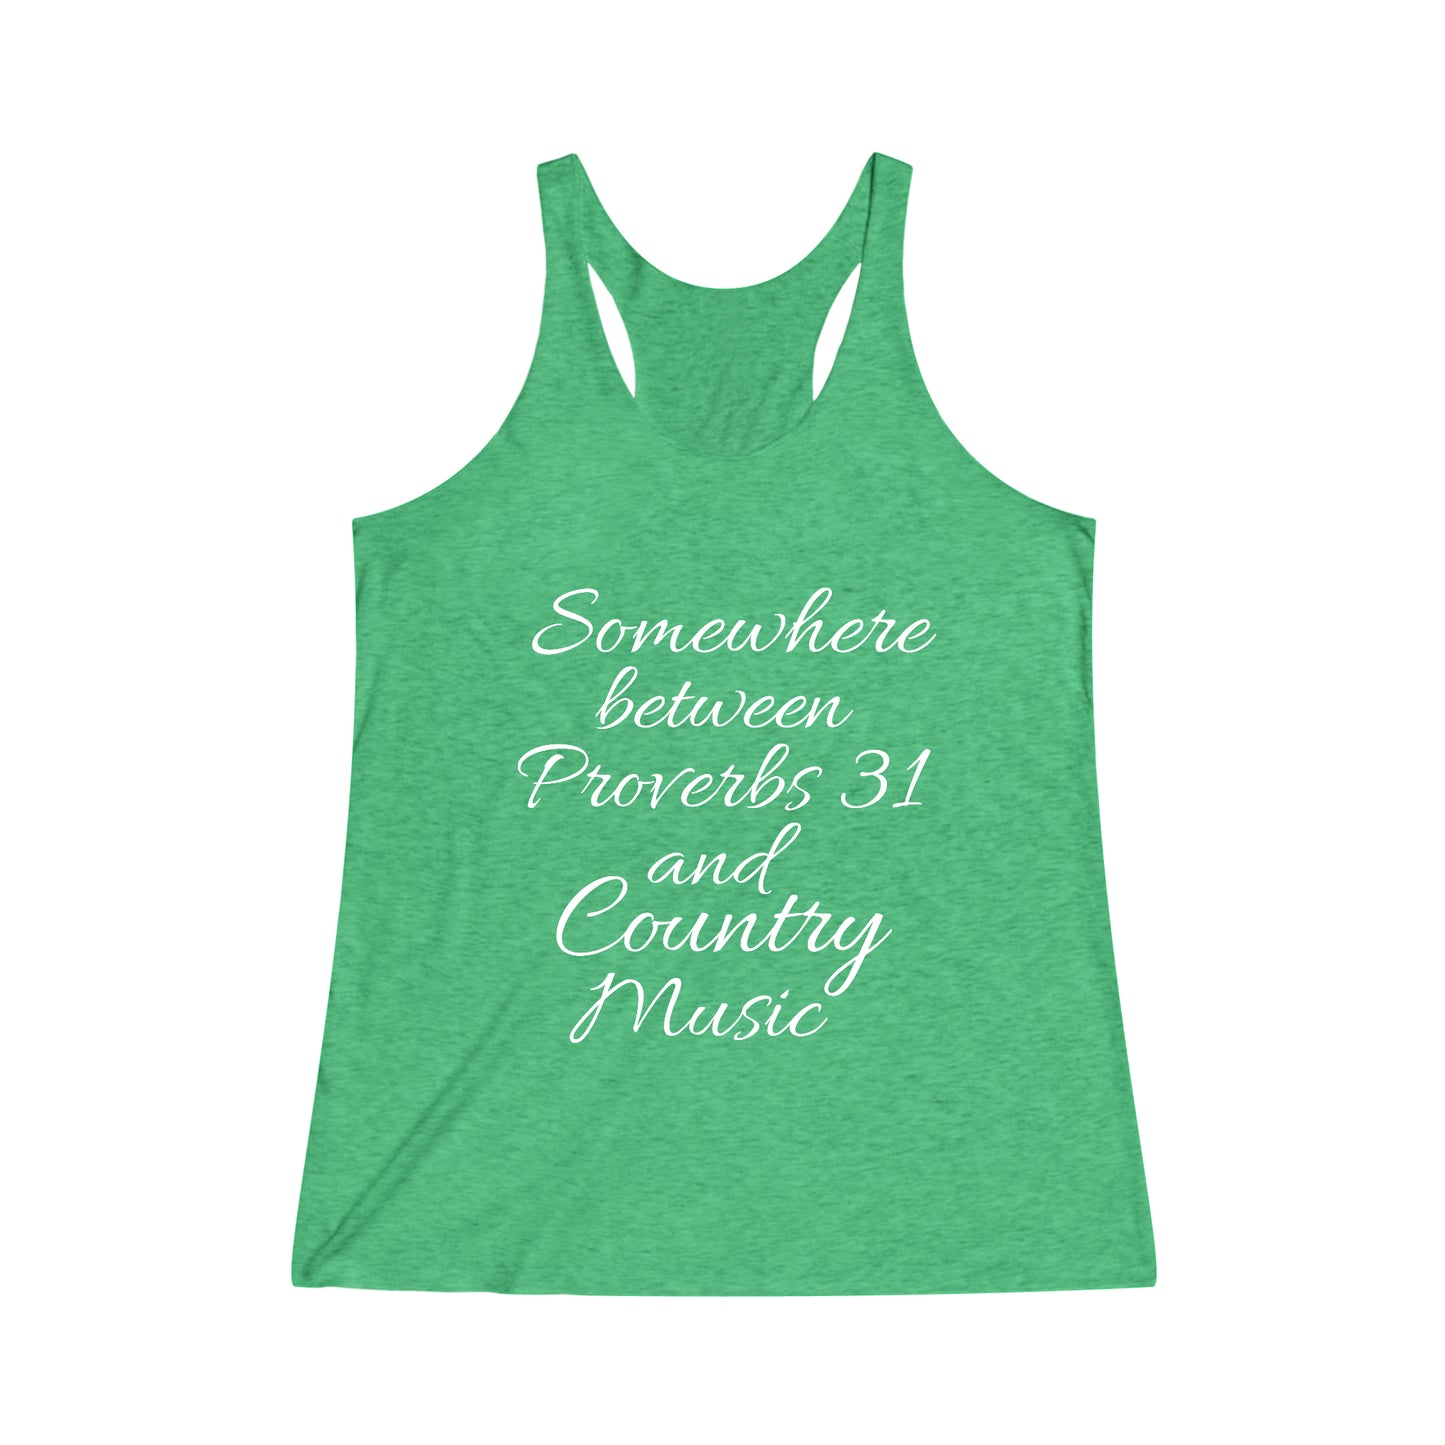 Somewhere Between Proverbs 31 and Country Music Women's Tri-Blend Racerback Tank